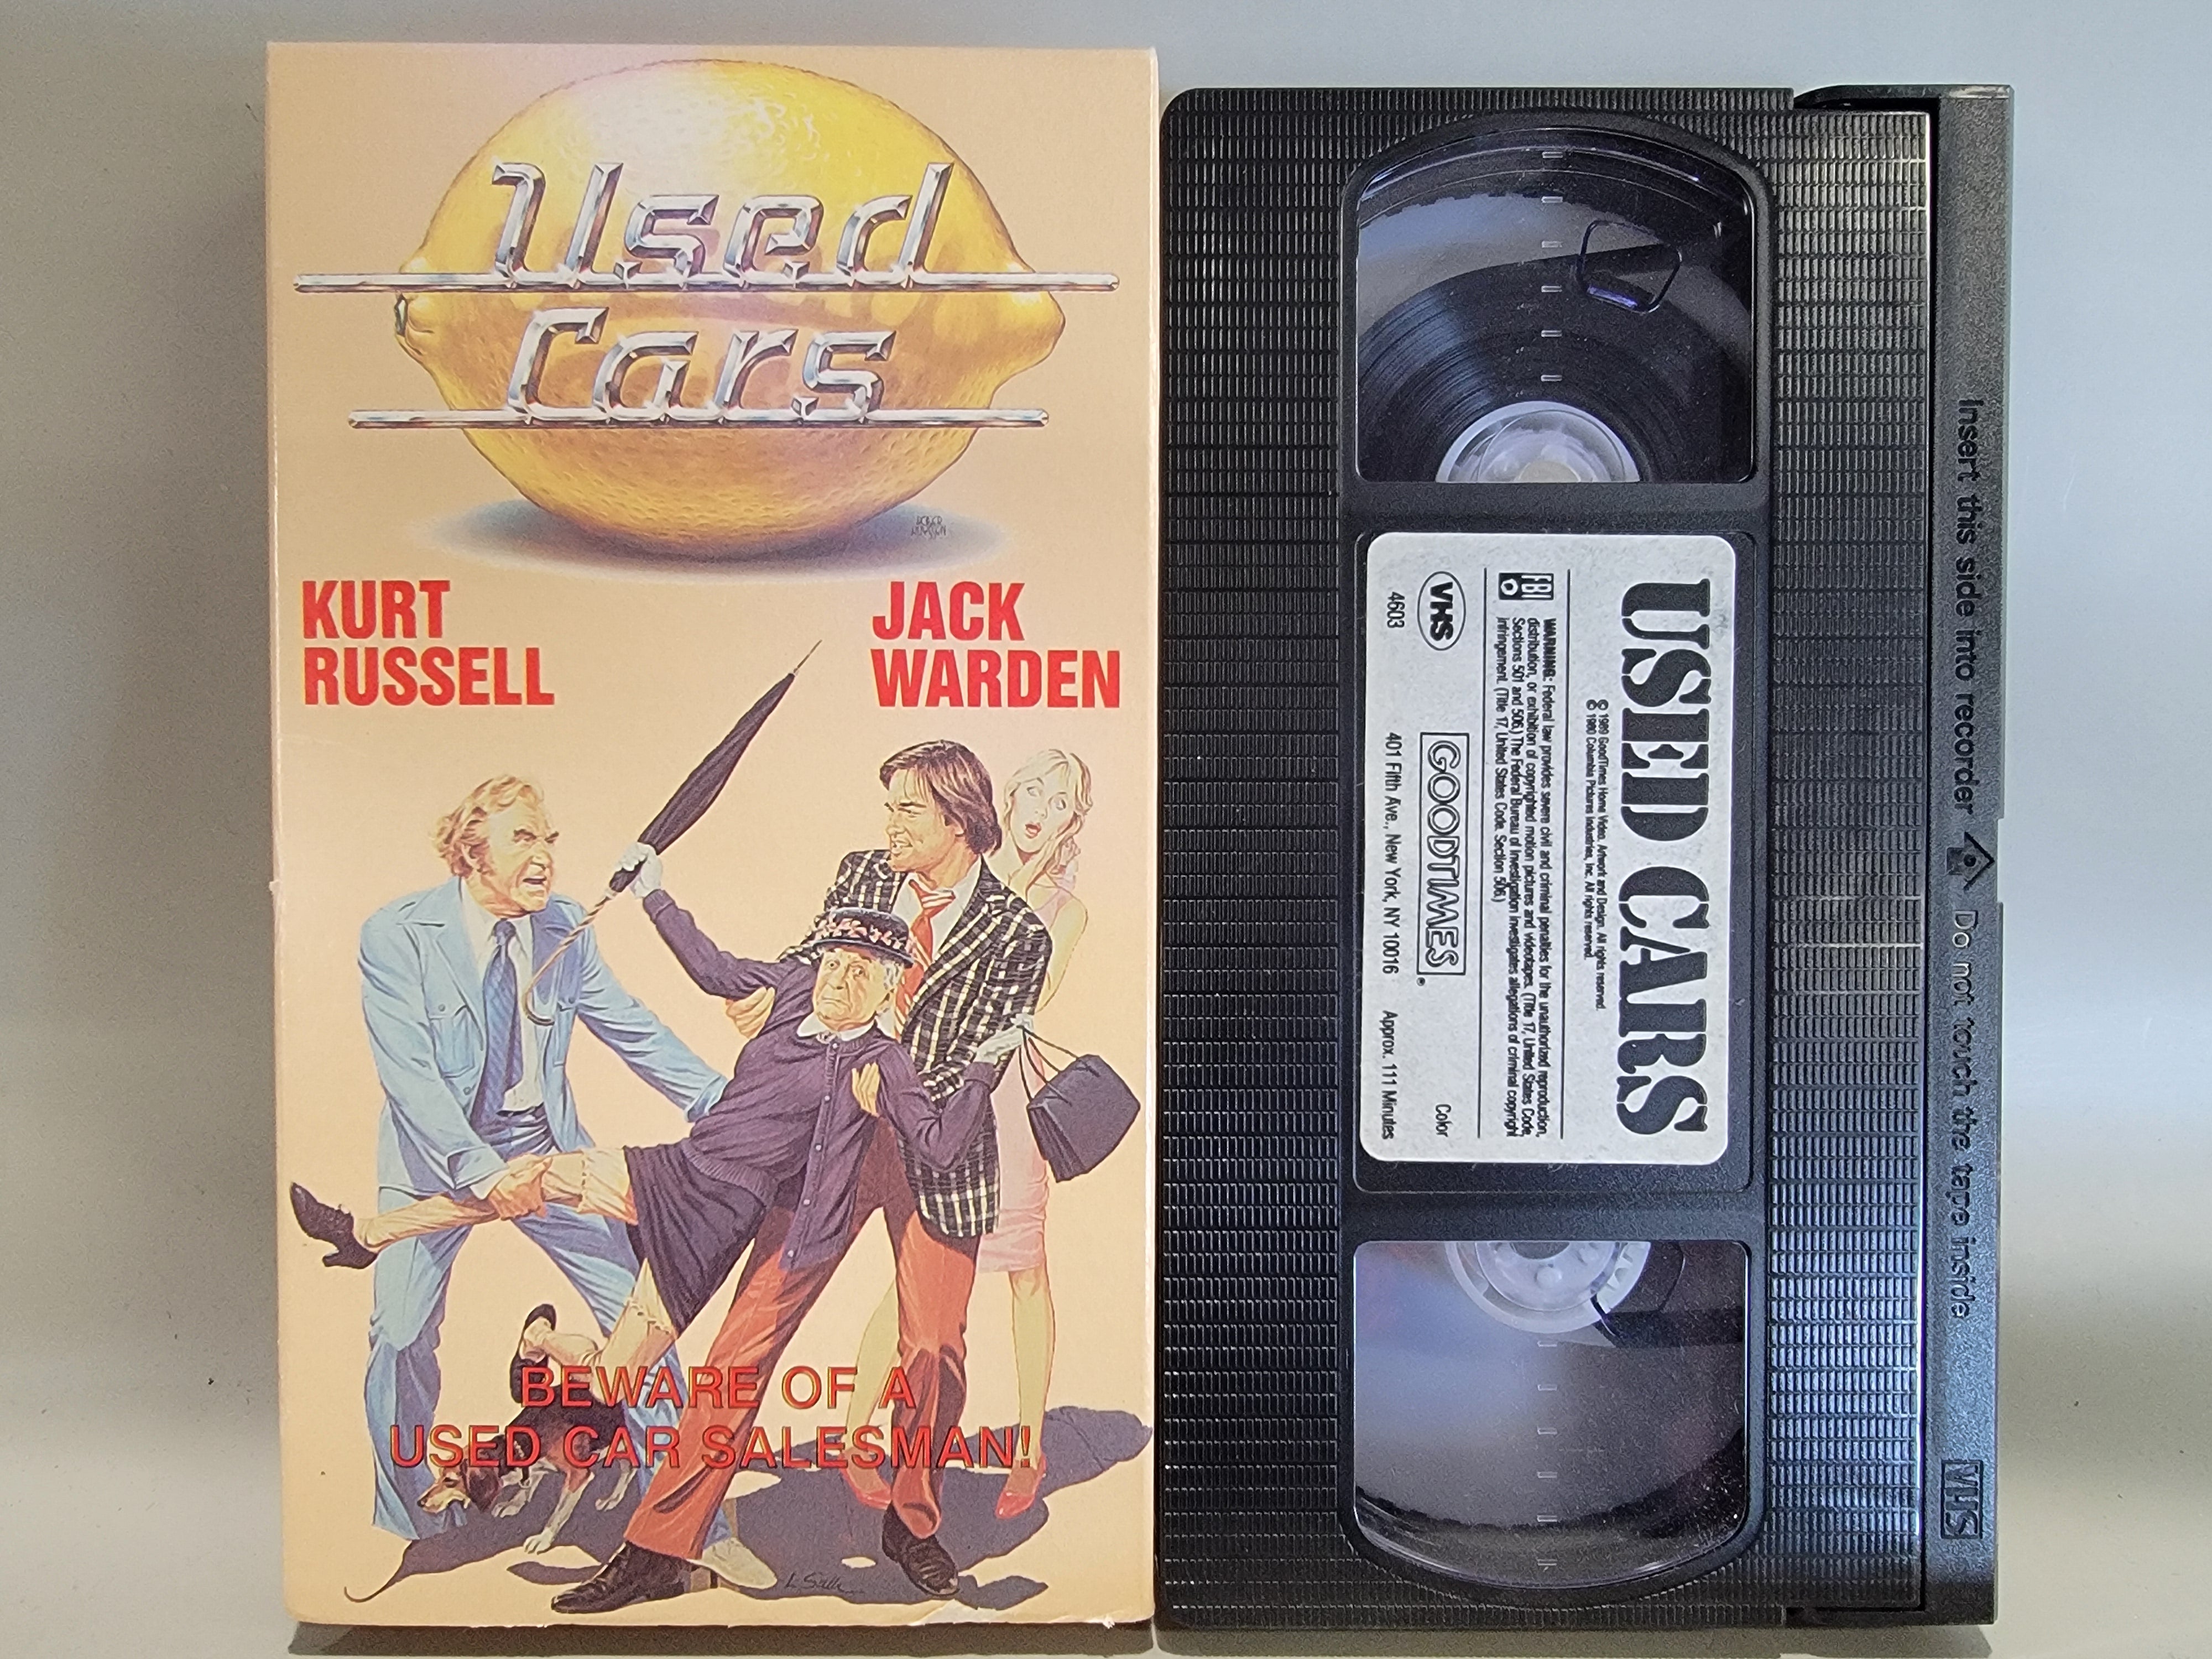 USED CARS VHS [USED]